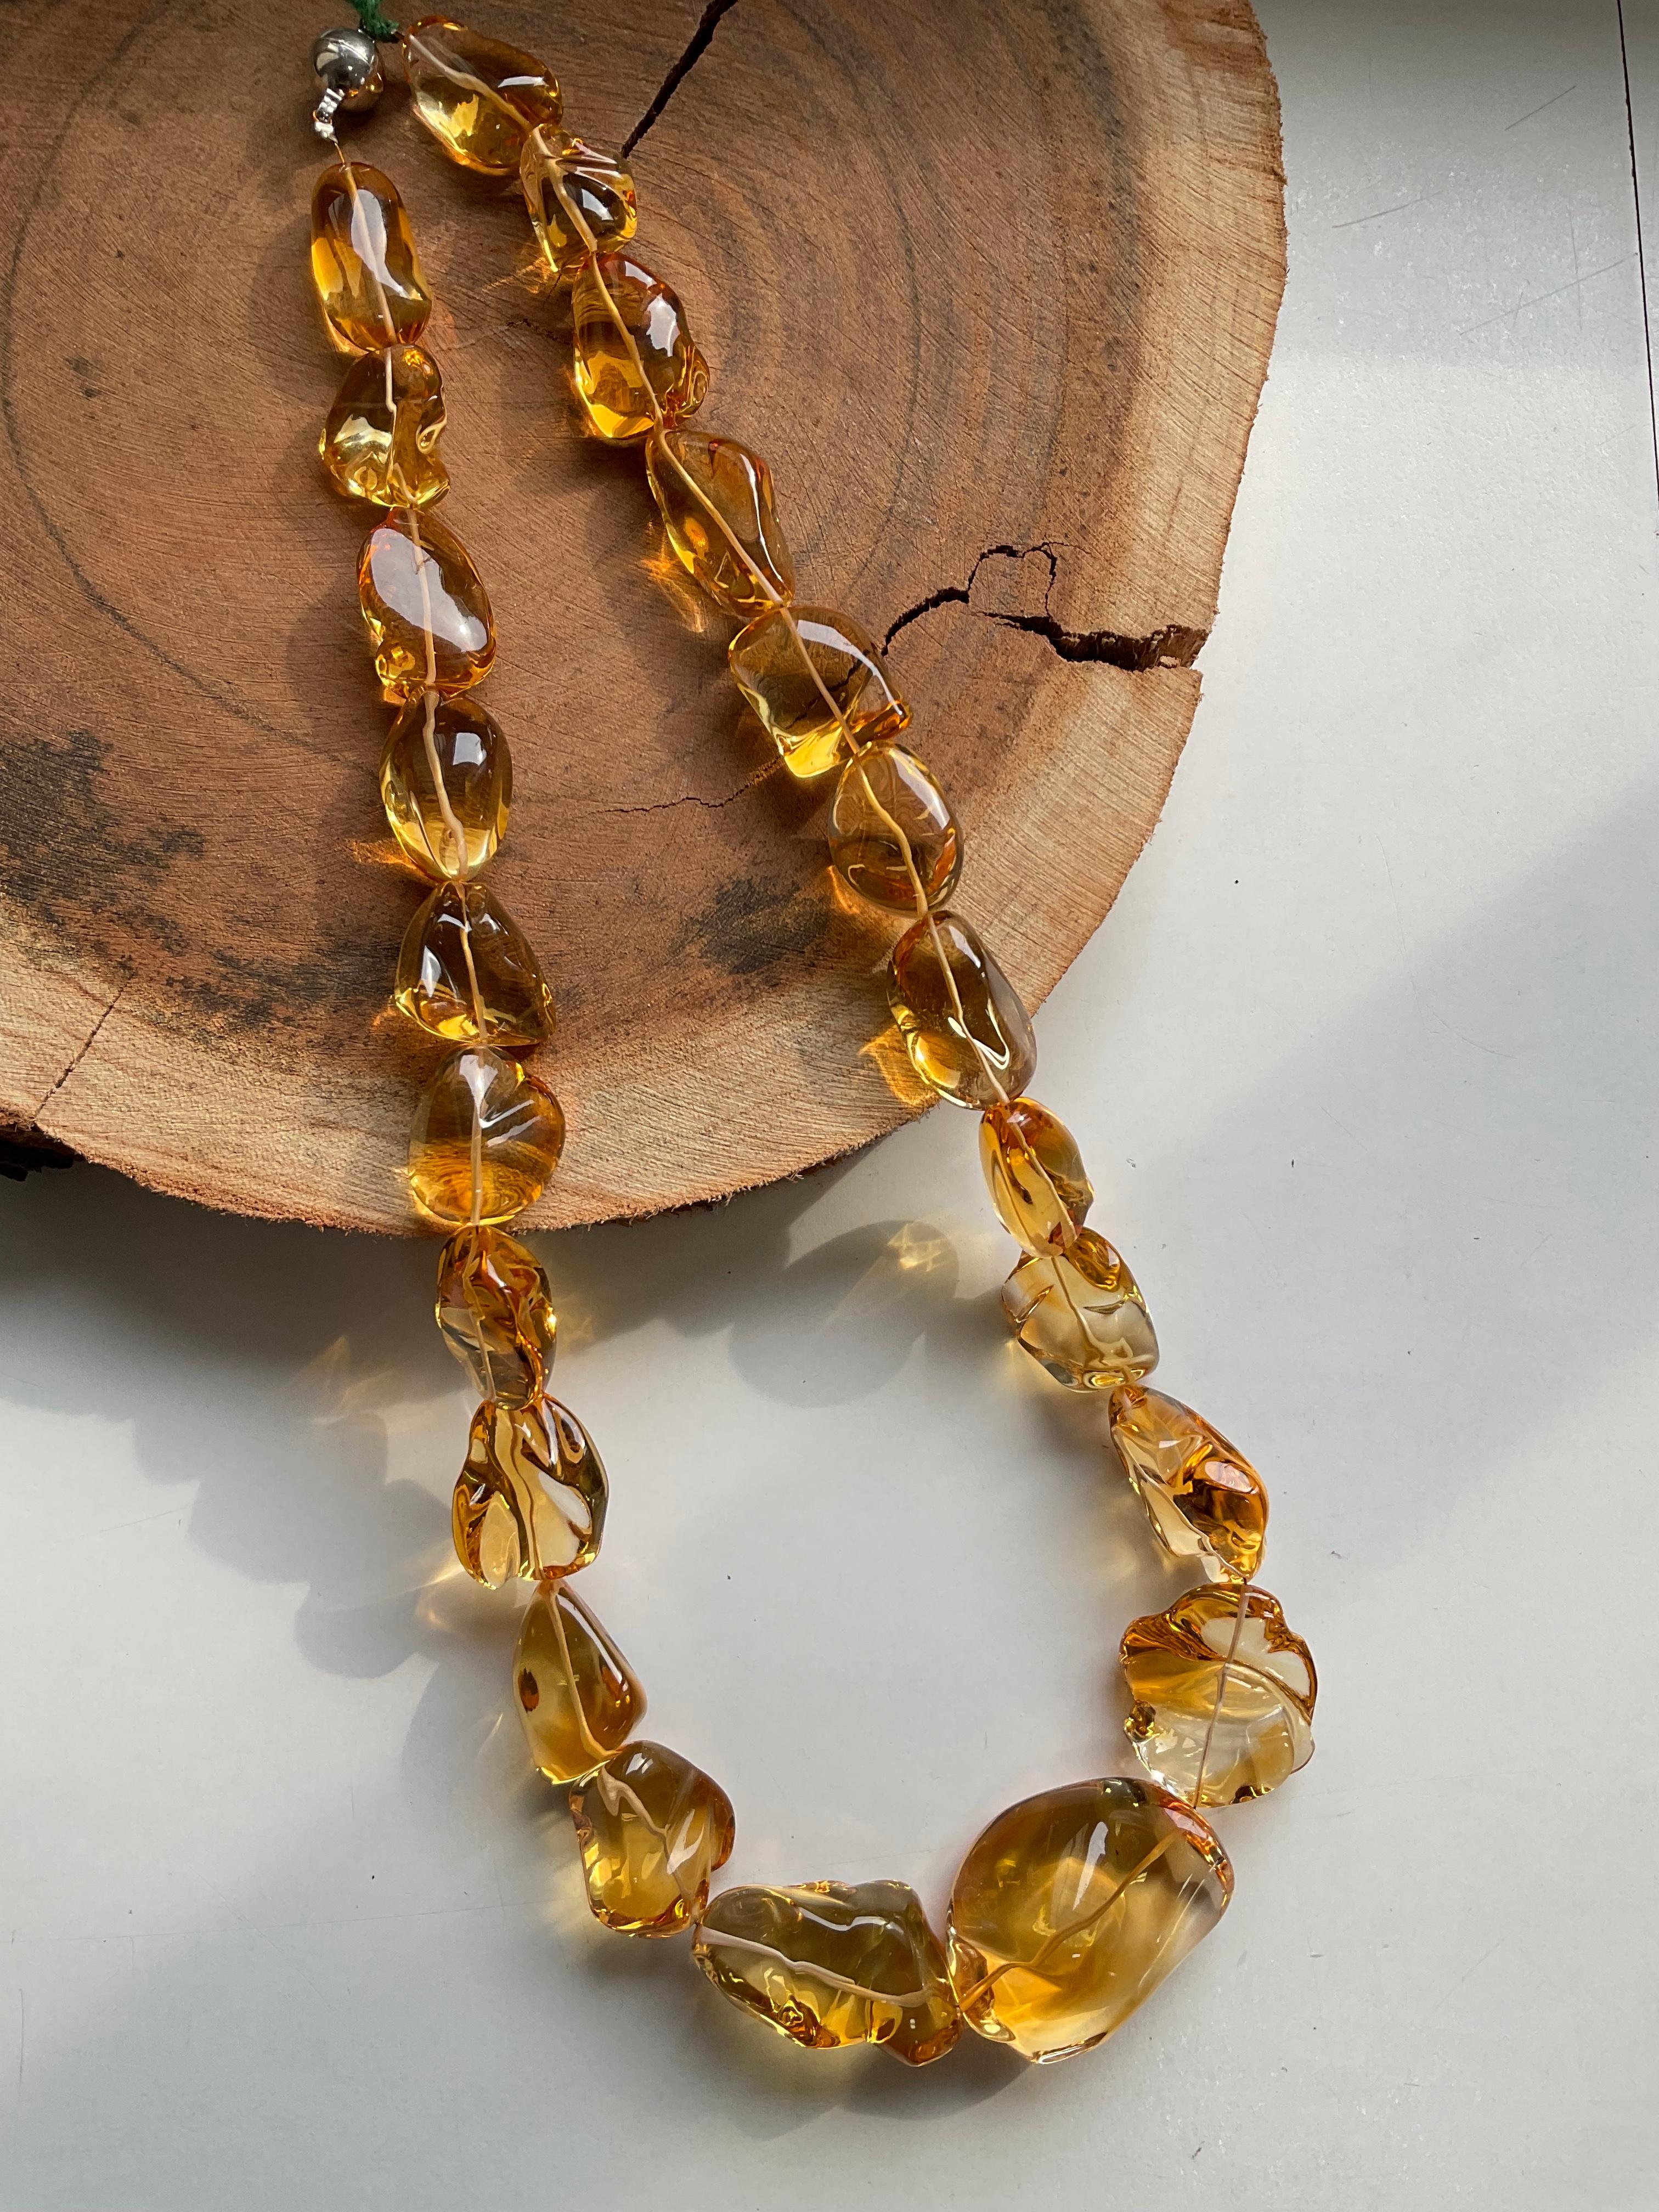 Citrine Quartz Beaded Jewelry Necklace Gem quality
Size : 13 X 20 To 27 X 37 MM 
Weight : 886 Carats
Length Of Necklace : 21 Inch 
Pieces : 23 Gems 